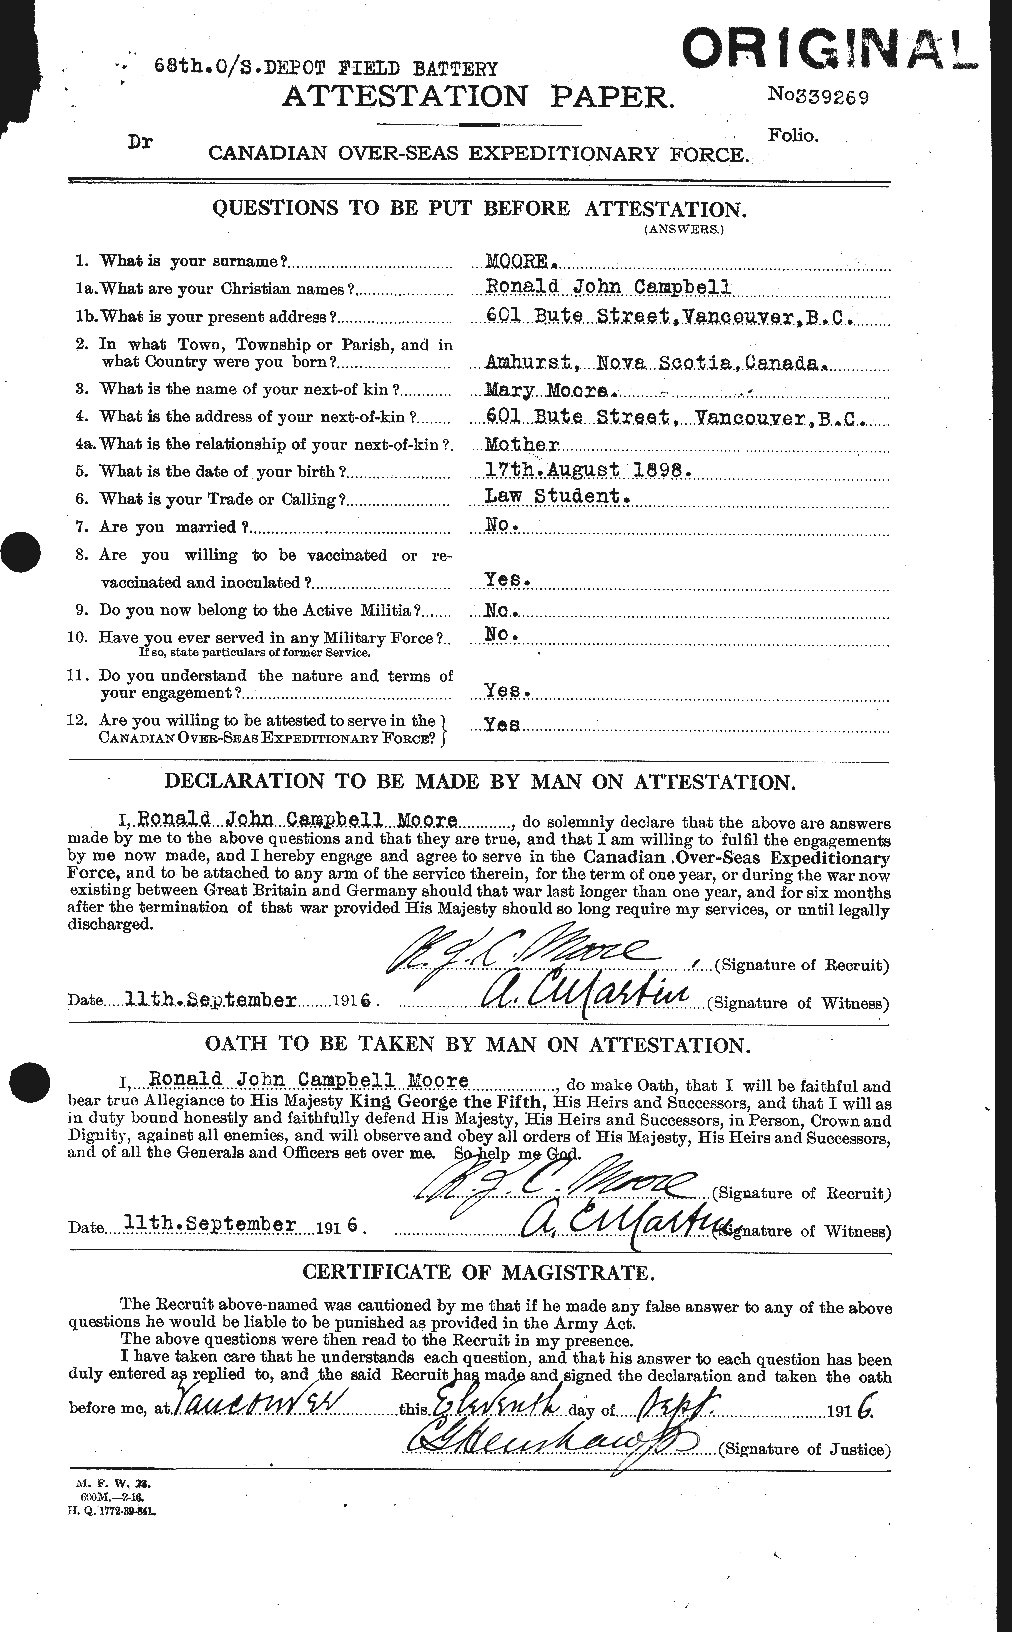 Personnel Records of the First World War - CEF 503590a